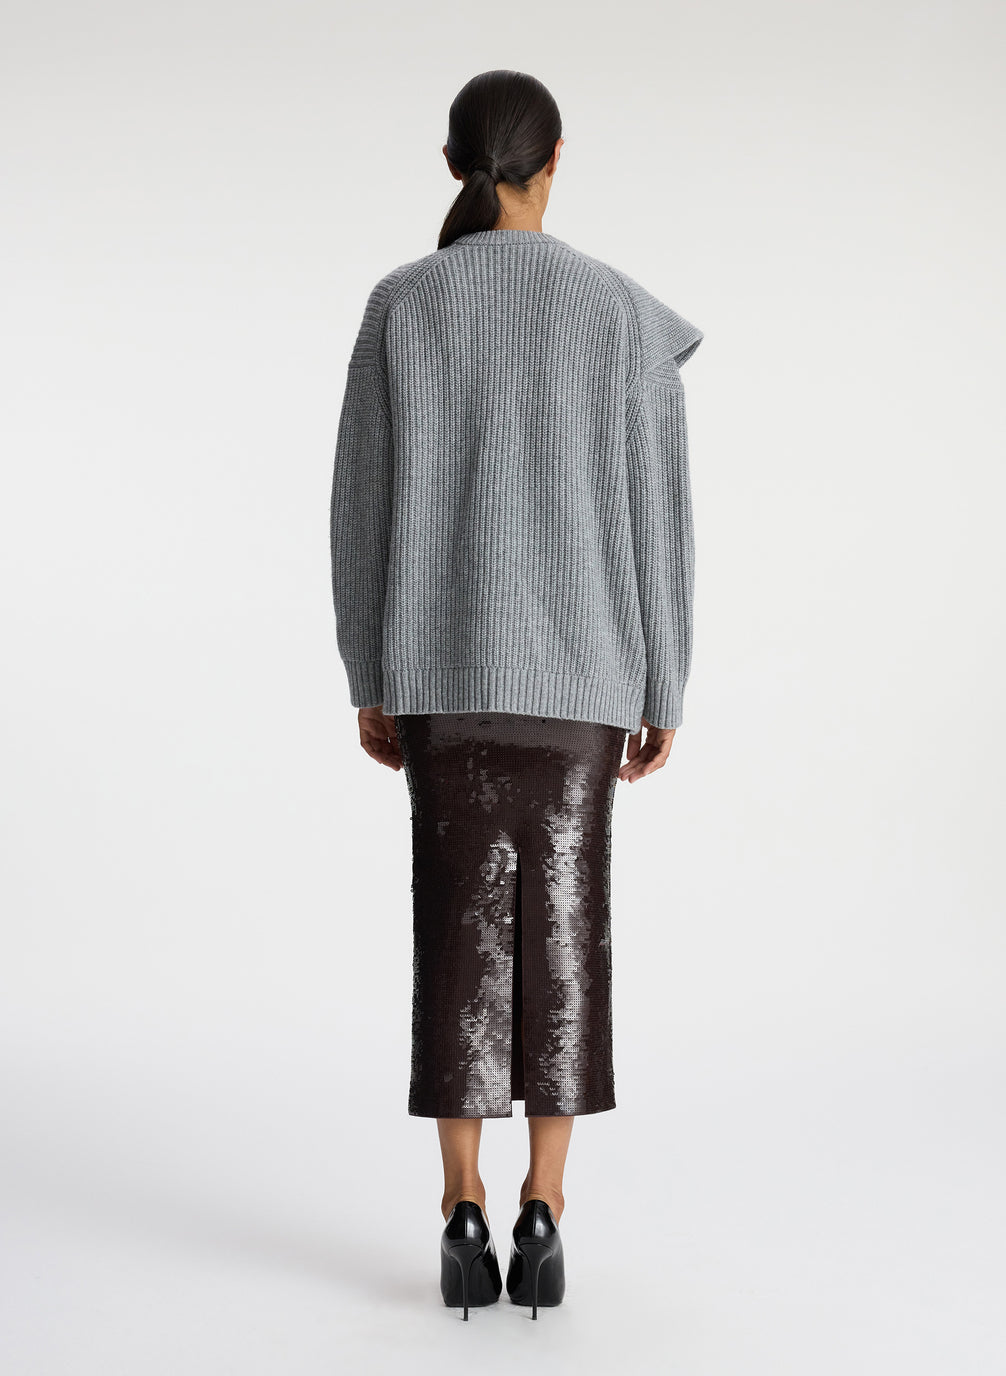 back view of woman wearing grey sweater with ruffle and brown sequin midi skirt